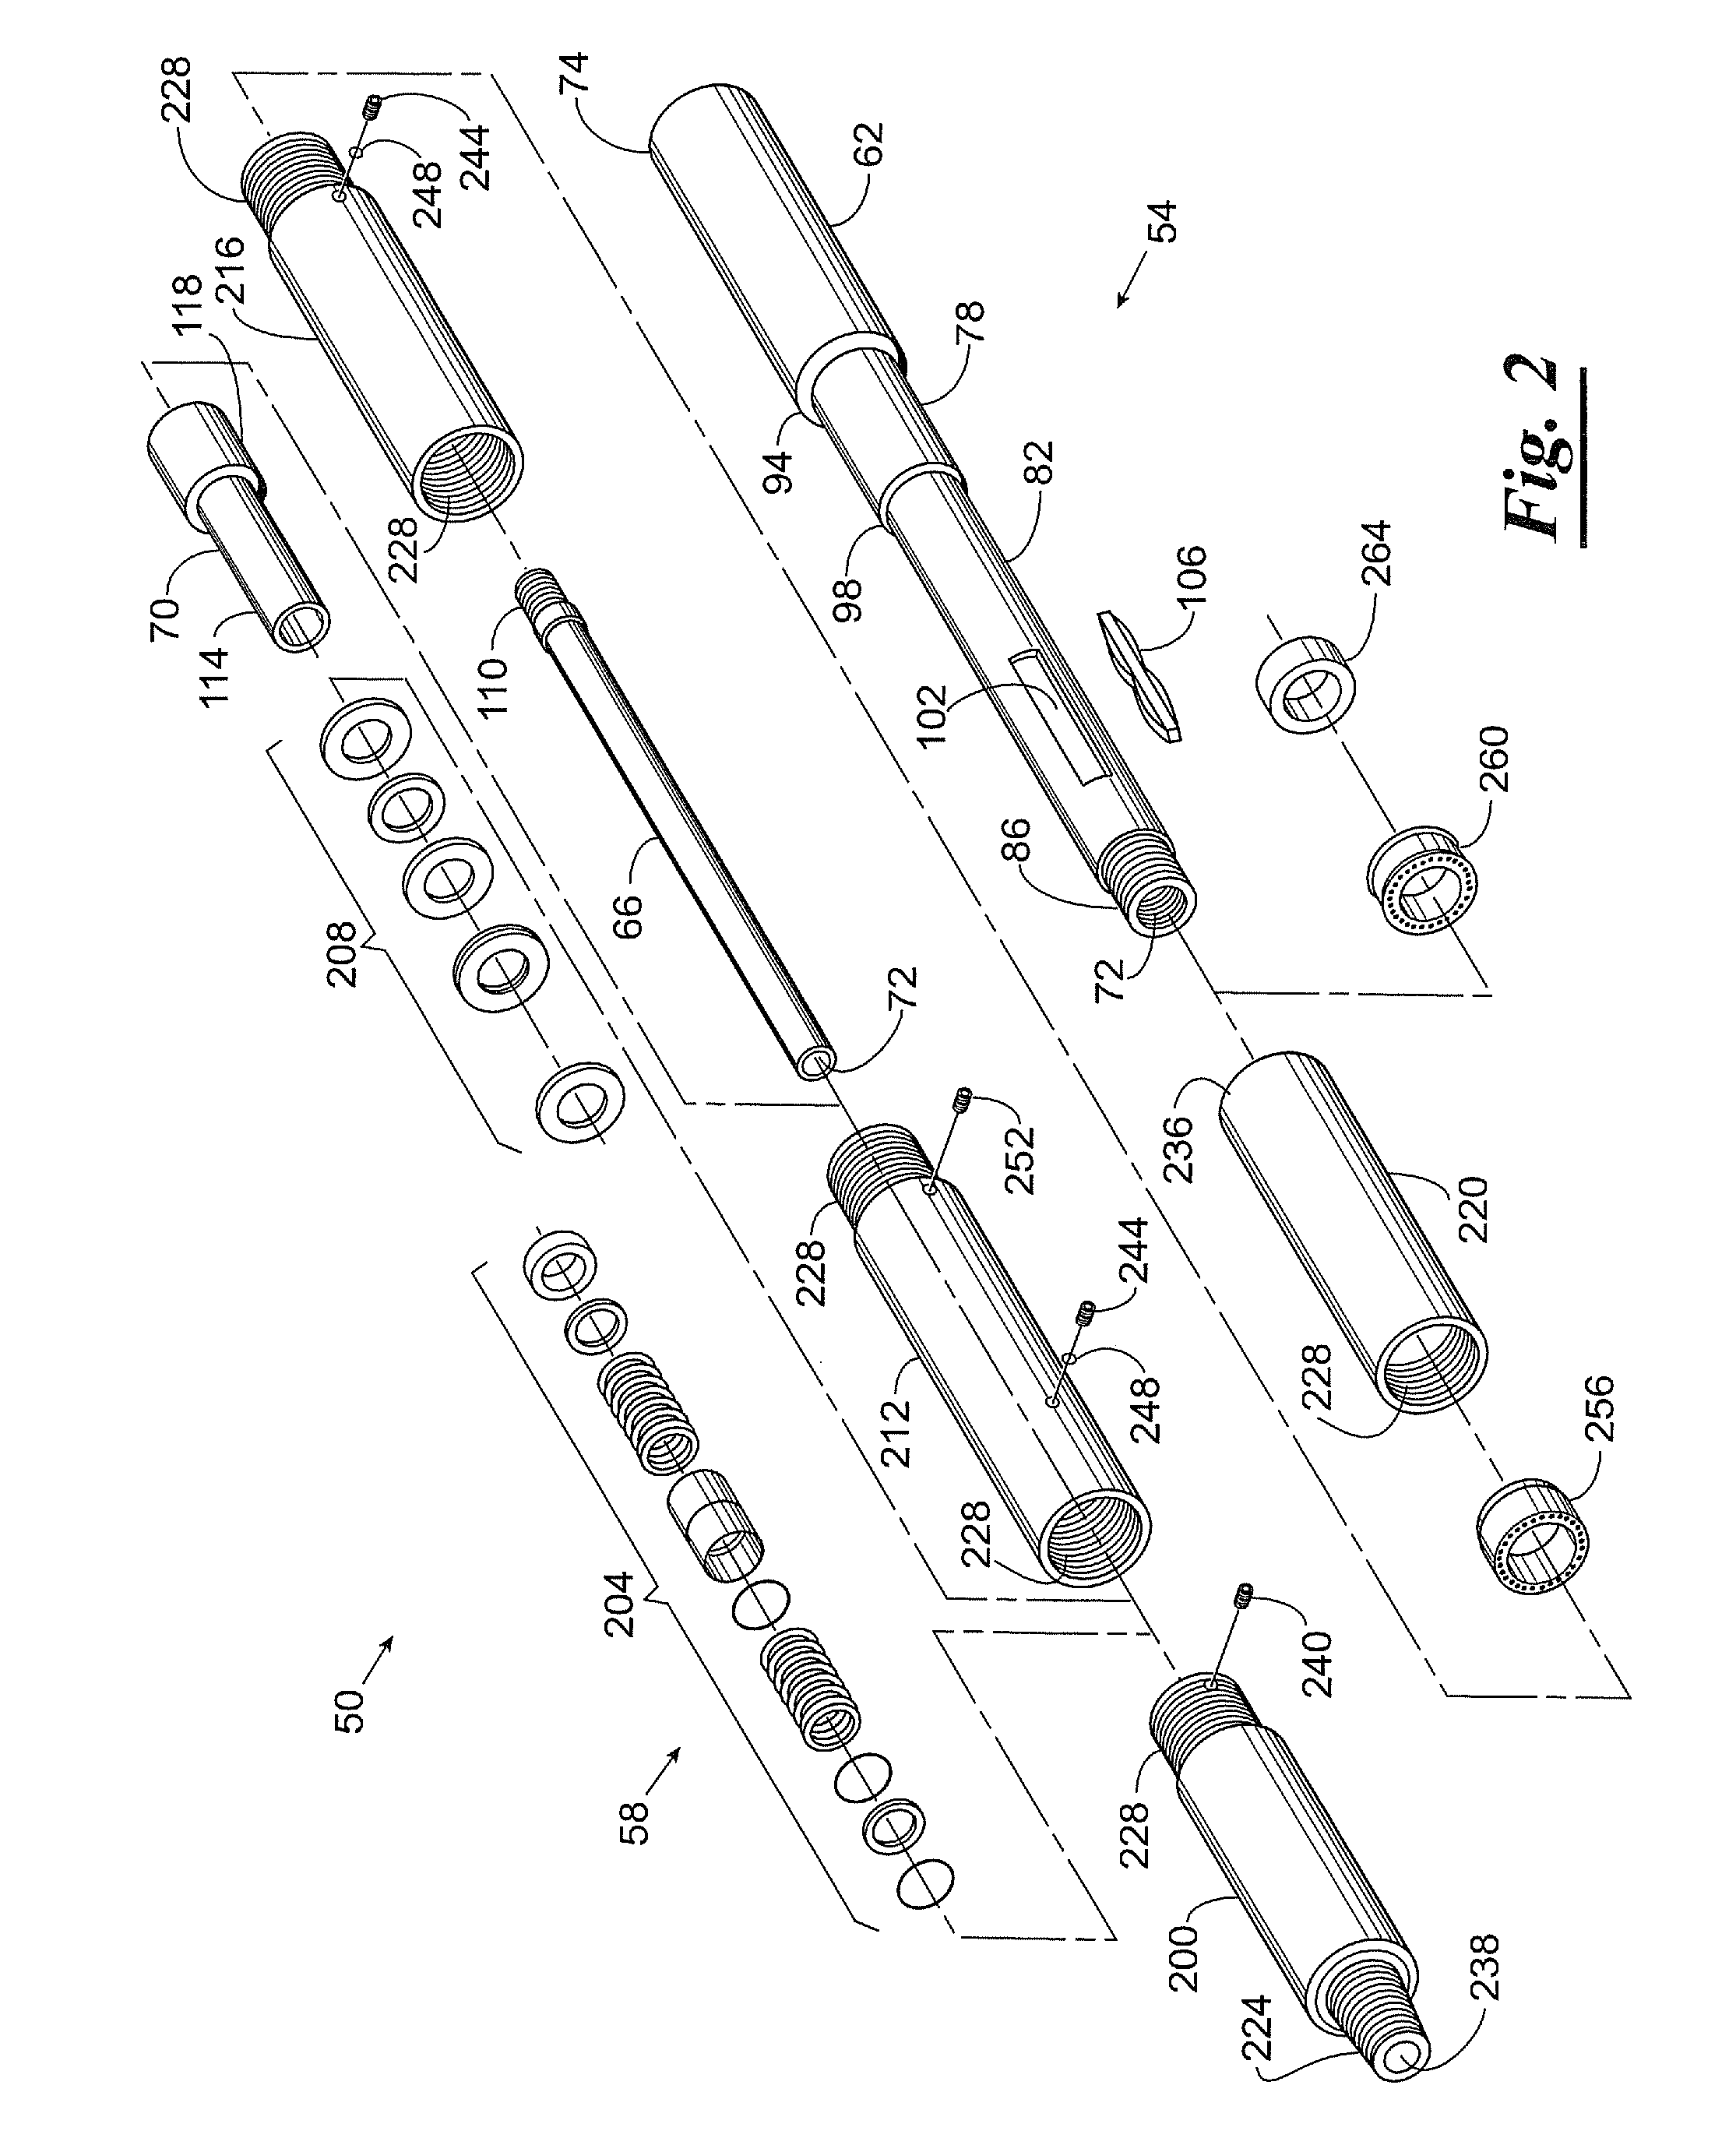 Downhole shock absorber for torsional and axial loads